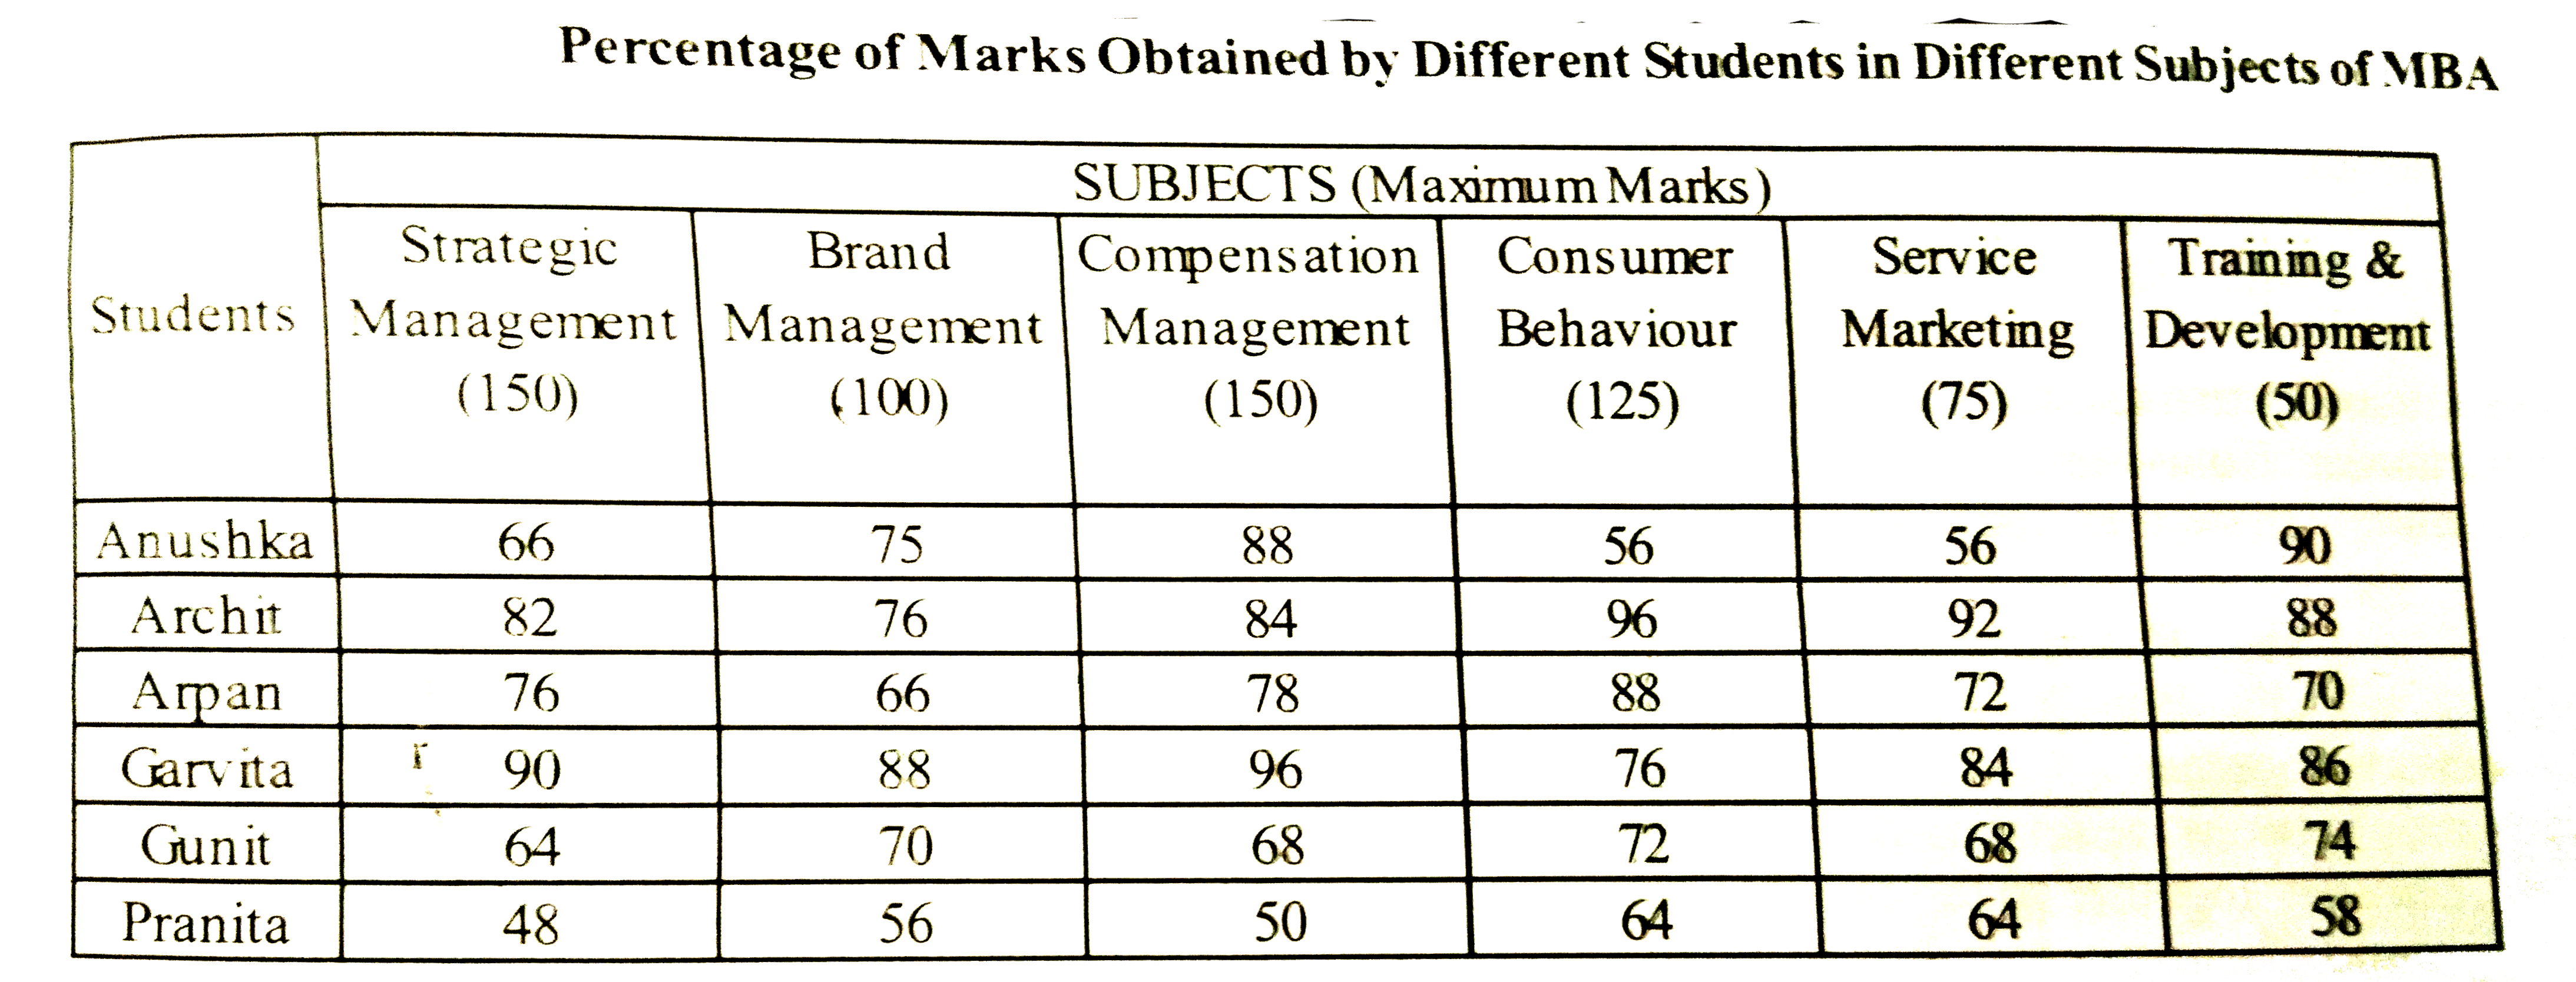 Marks obtained bu Garvita in Brand Management are what percent of marks obtained by Archit in the same subjects ? (rounde of to two digits after decimal)